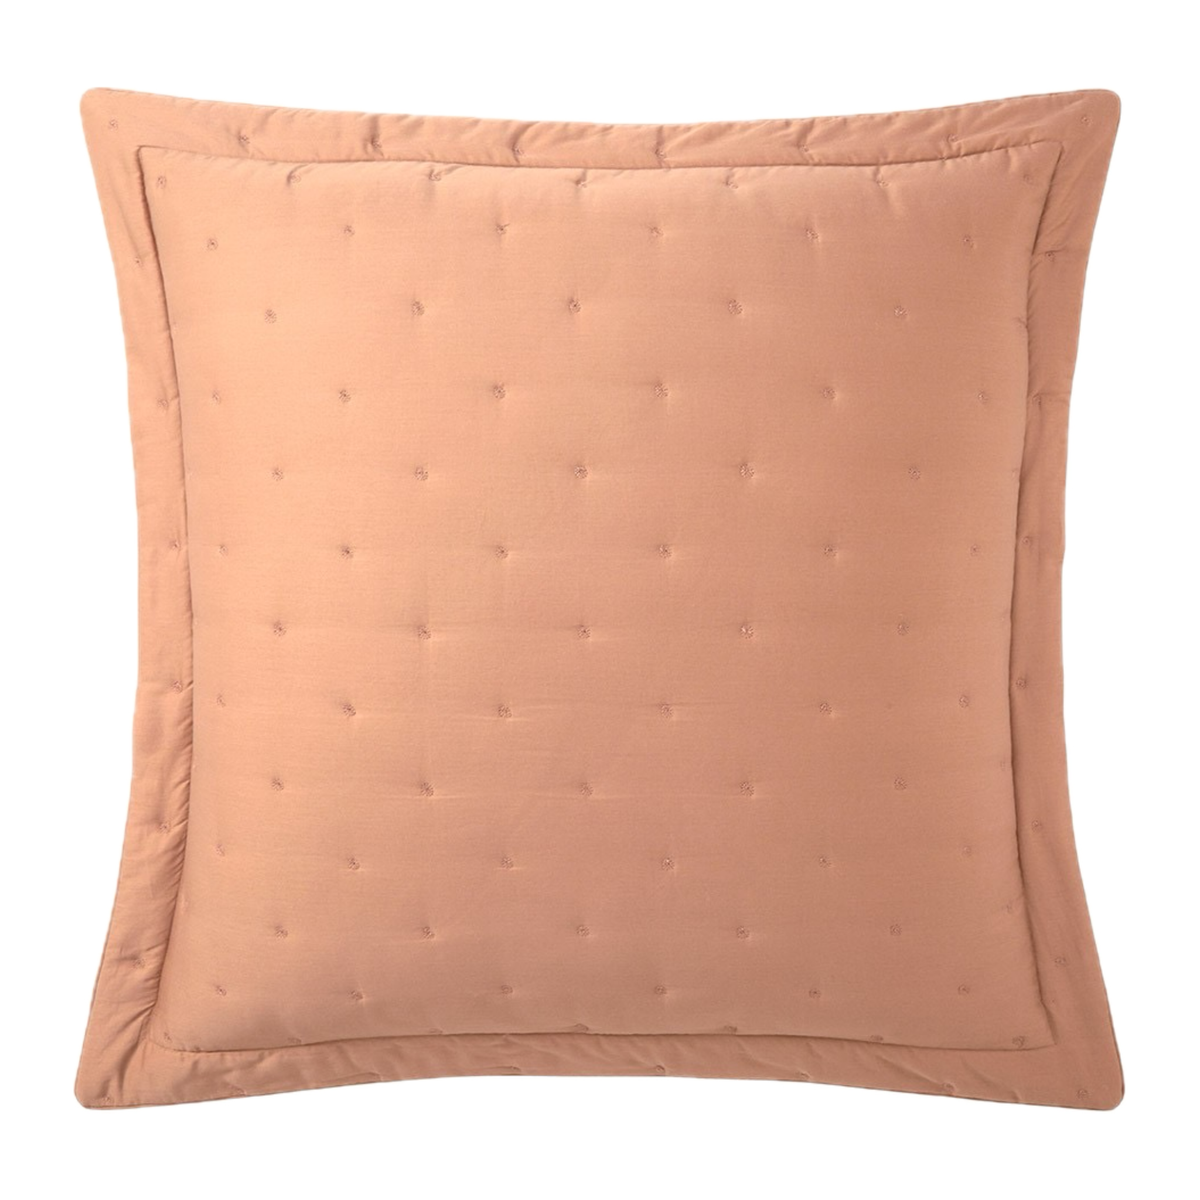 Euro Sham of Yves Delorme Quilted Triomphe Bedding in Sienna Color